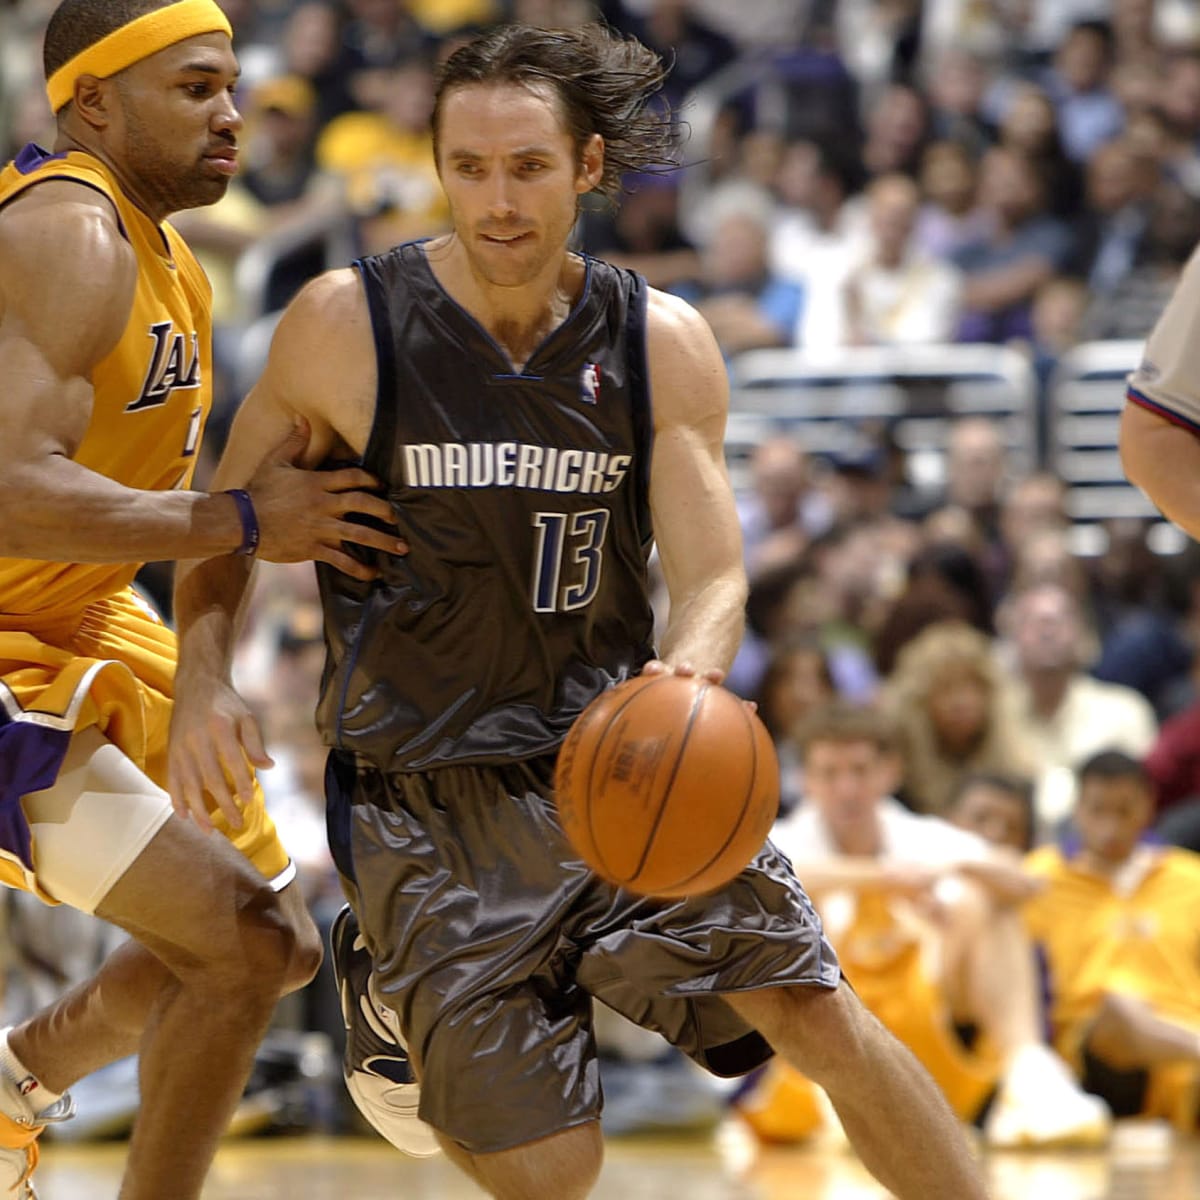 worst nba jerseys of all time